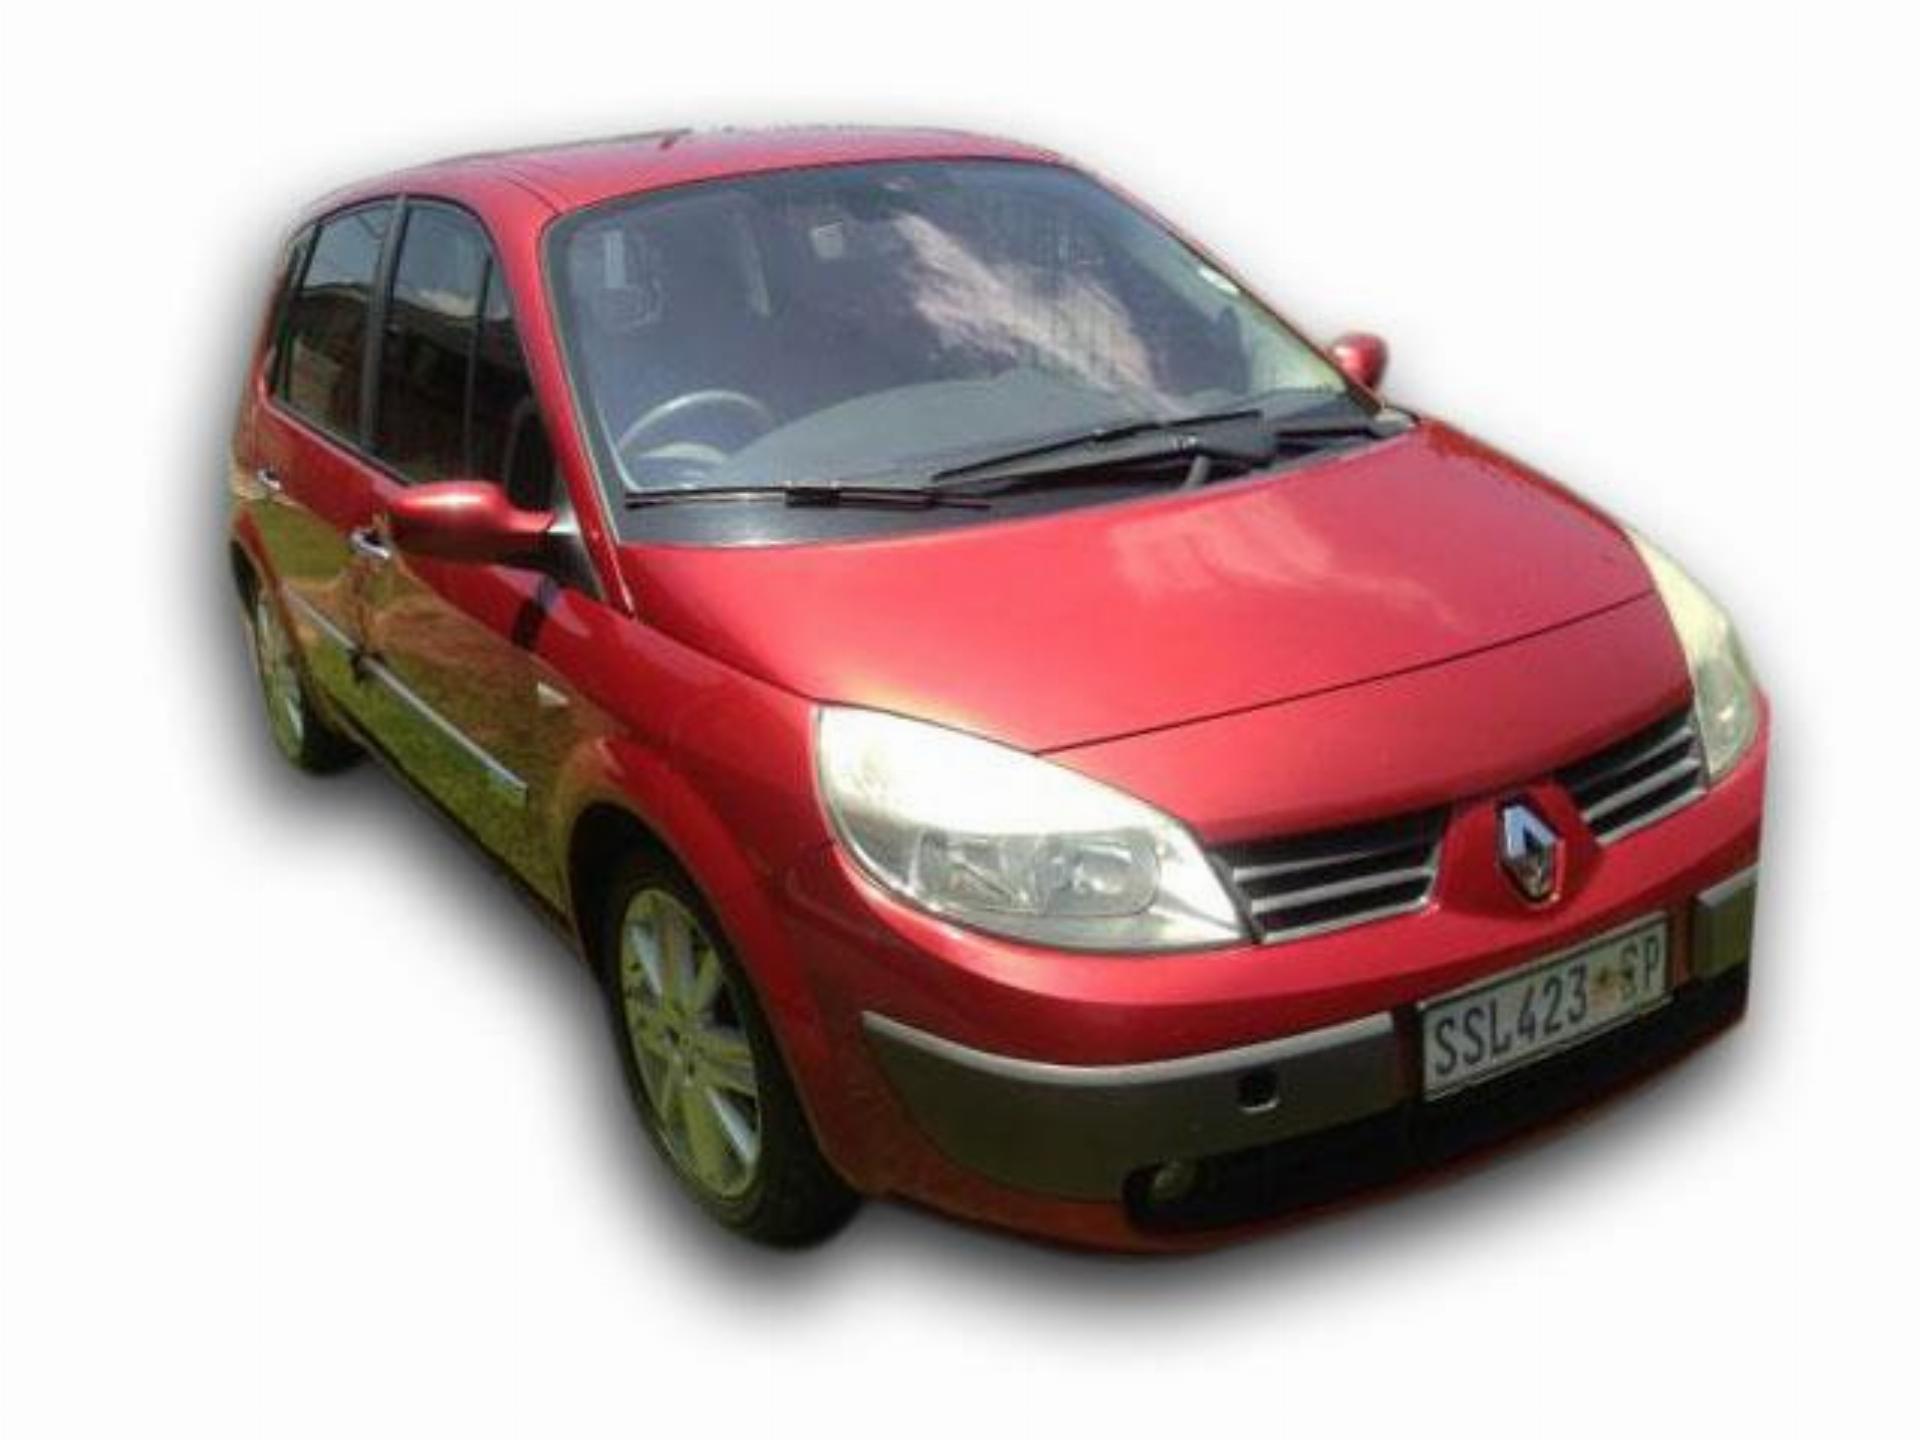 Used Renault Megane Scenic Scenic 2.0 Rxe 2005 on auction